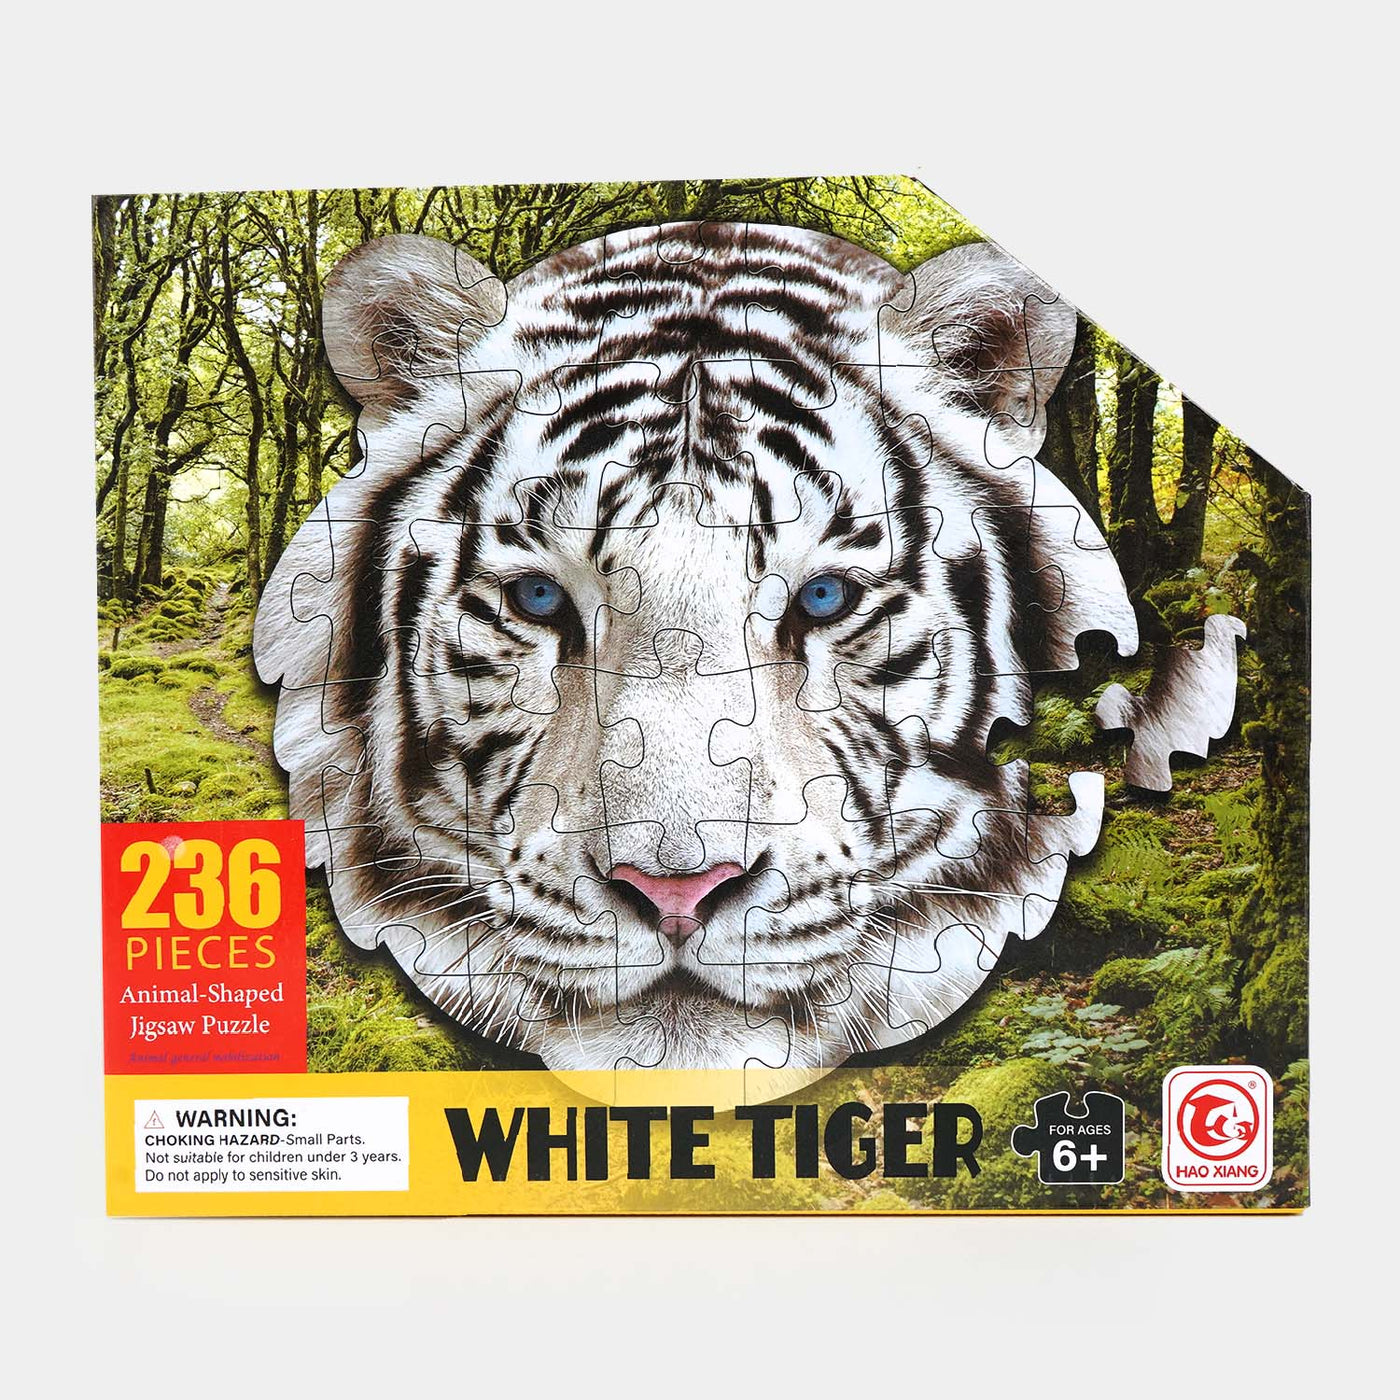 White Tiger Animal Shaped Jigsaw Puzzle 236 pieces